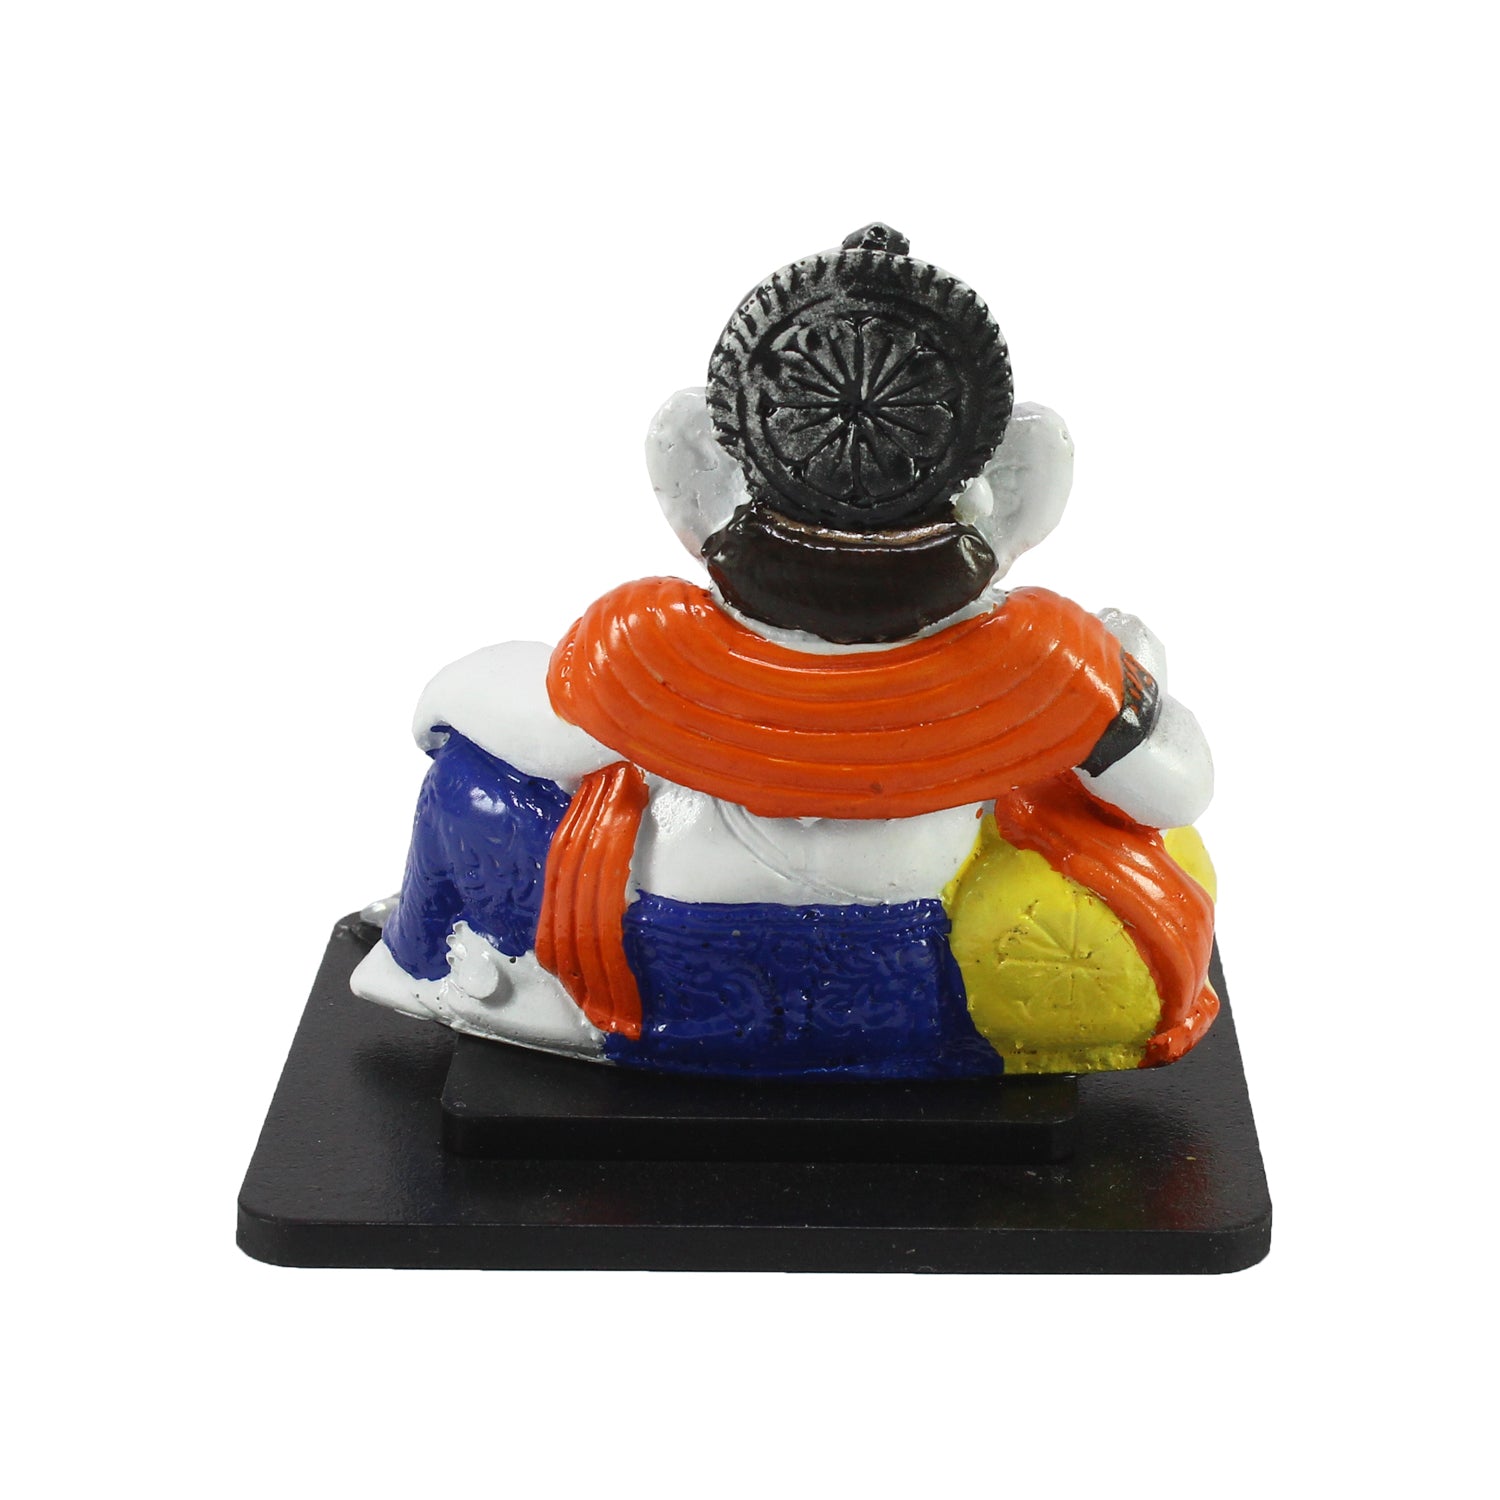 Decorative Lord Ganesha Idol For Car Dashboard, Home Temple, And Office Desks 5